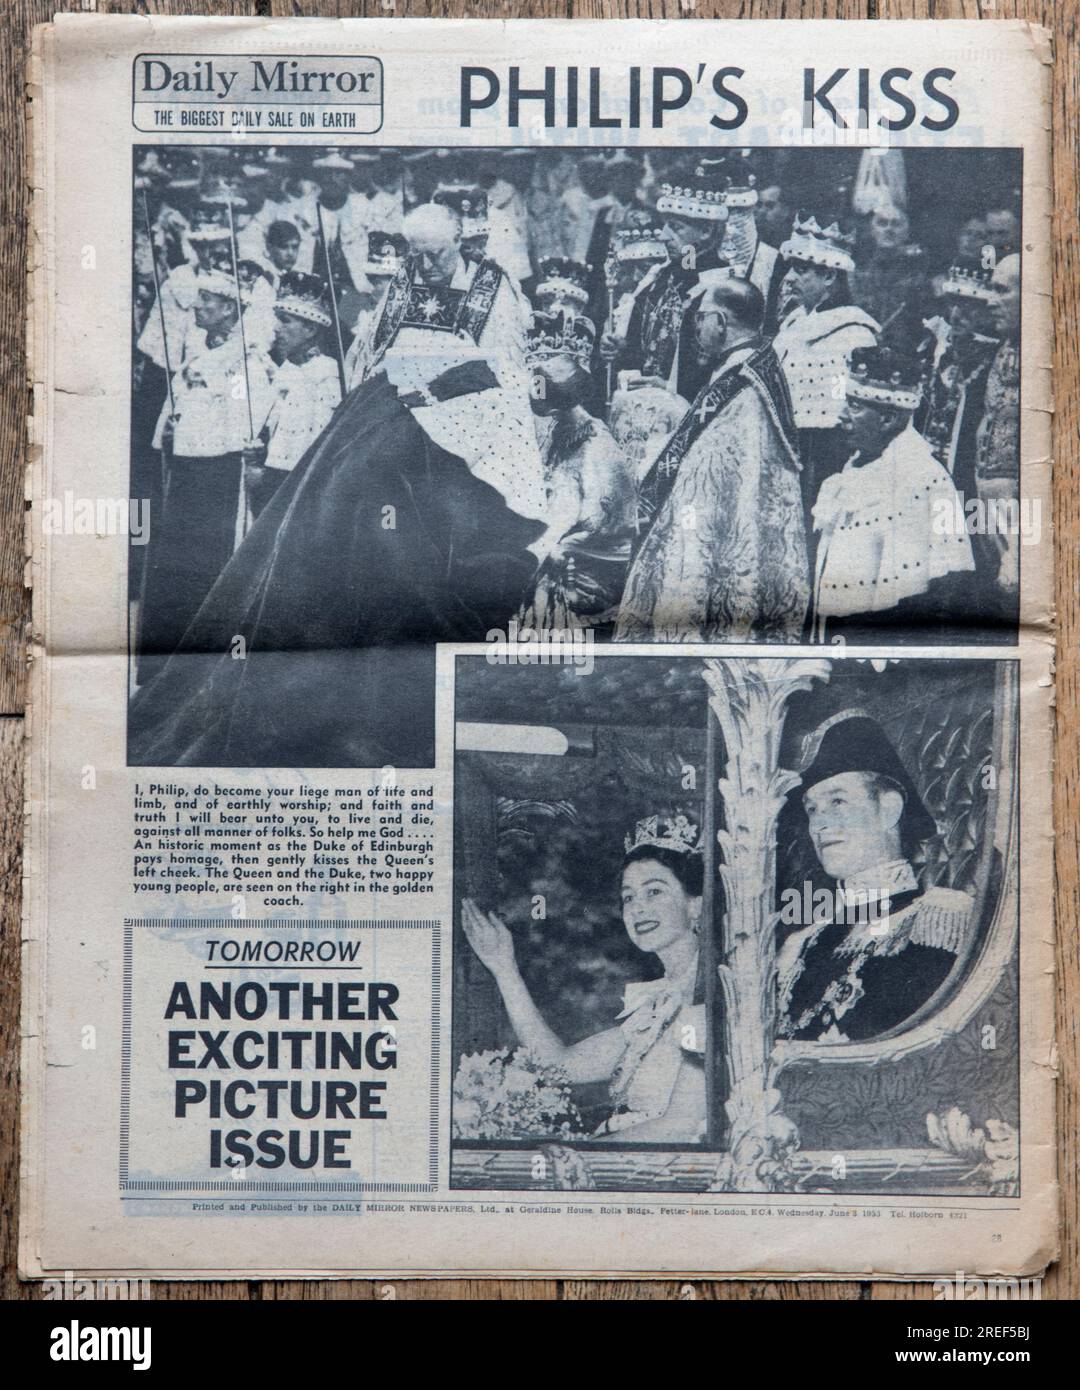 Queen Elizabeth II Coronation Special, 2nd June 1953. The Daily Mirror newspaper. Front page news. Dated 3rd June 1953. An old worn used copy of a British tabloid newspaper. 1950s Britain UK. Stock Photo